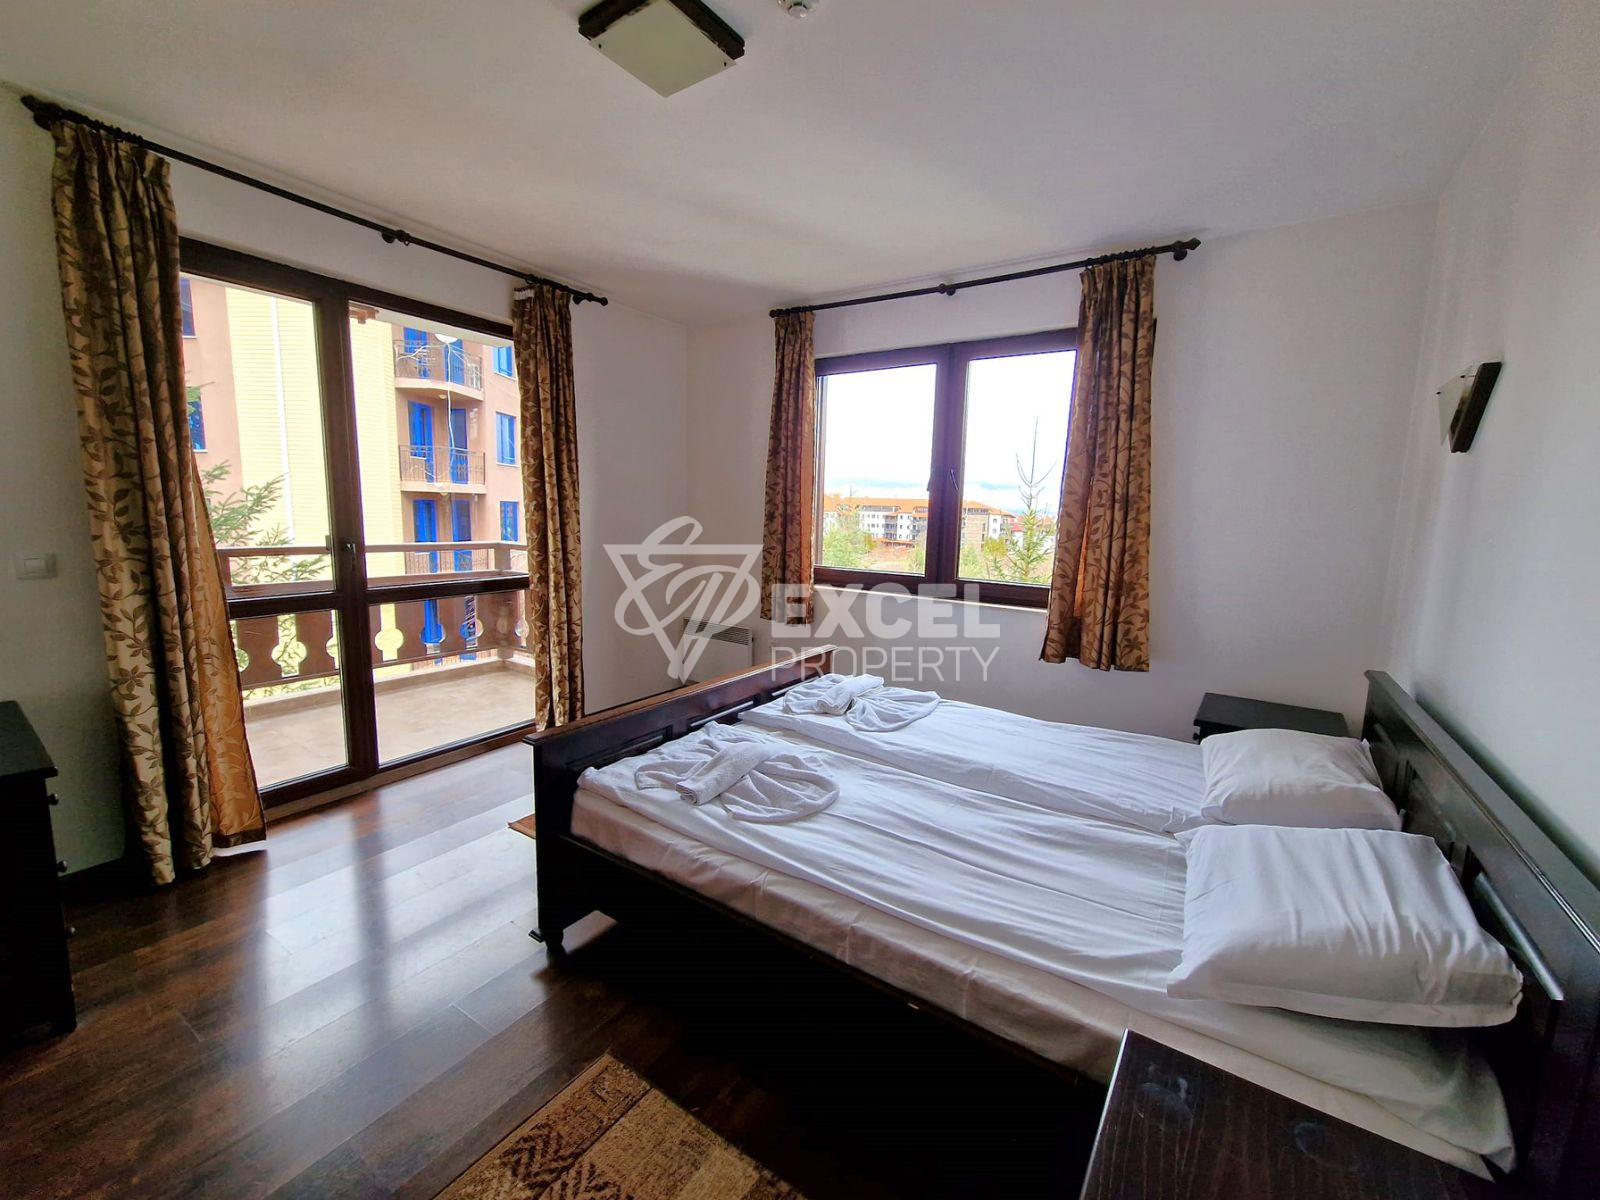 Two bedroom apartment with stunning Rila views in Winslow Infinity